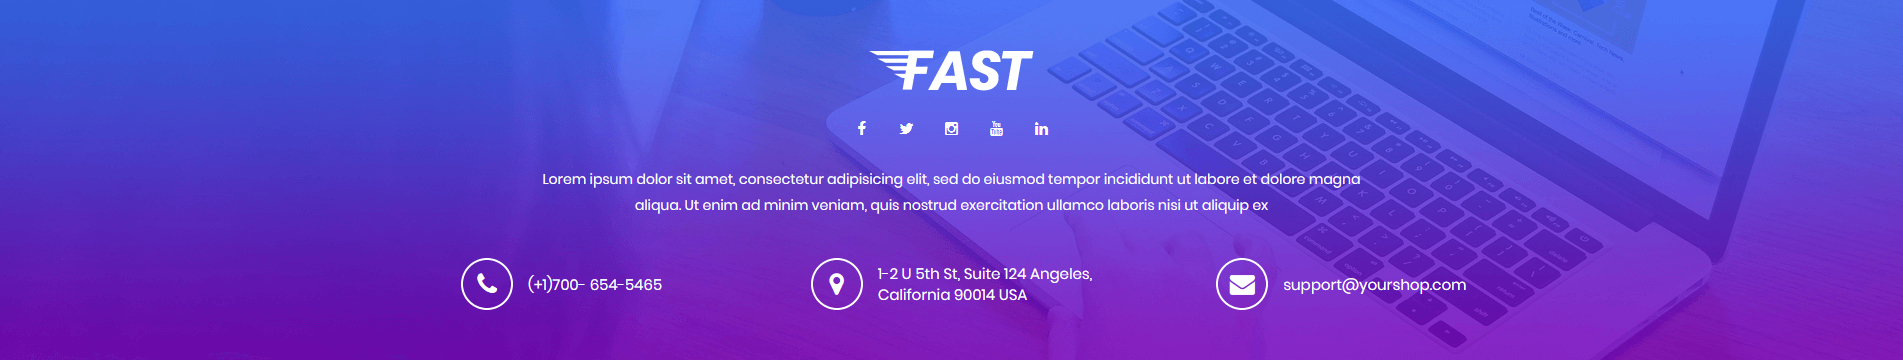 Fast - Footer Top Frontend